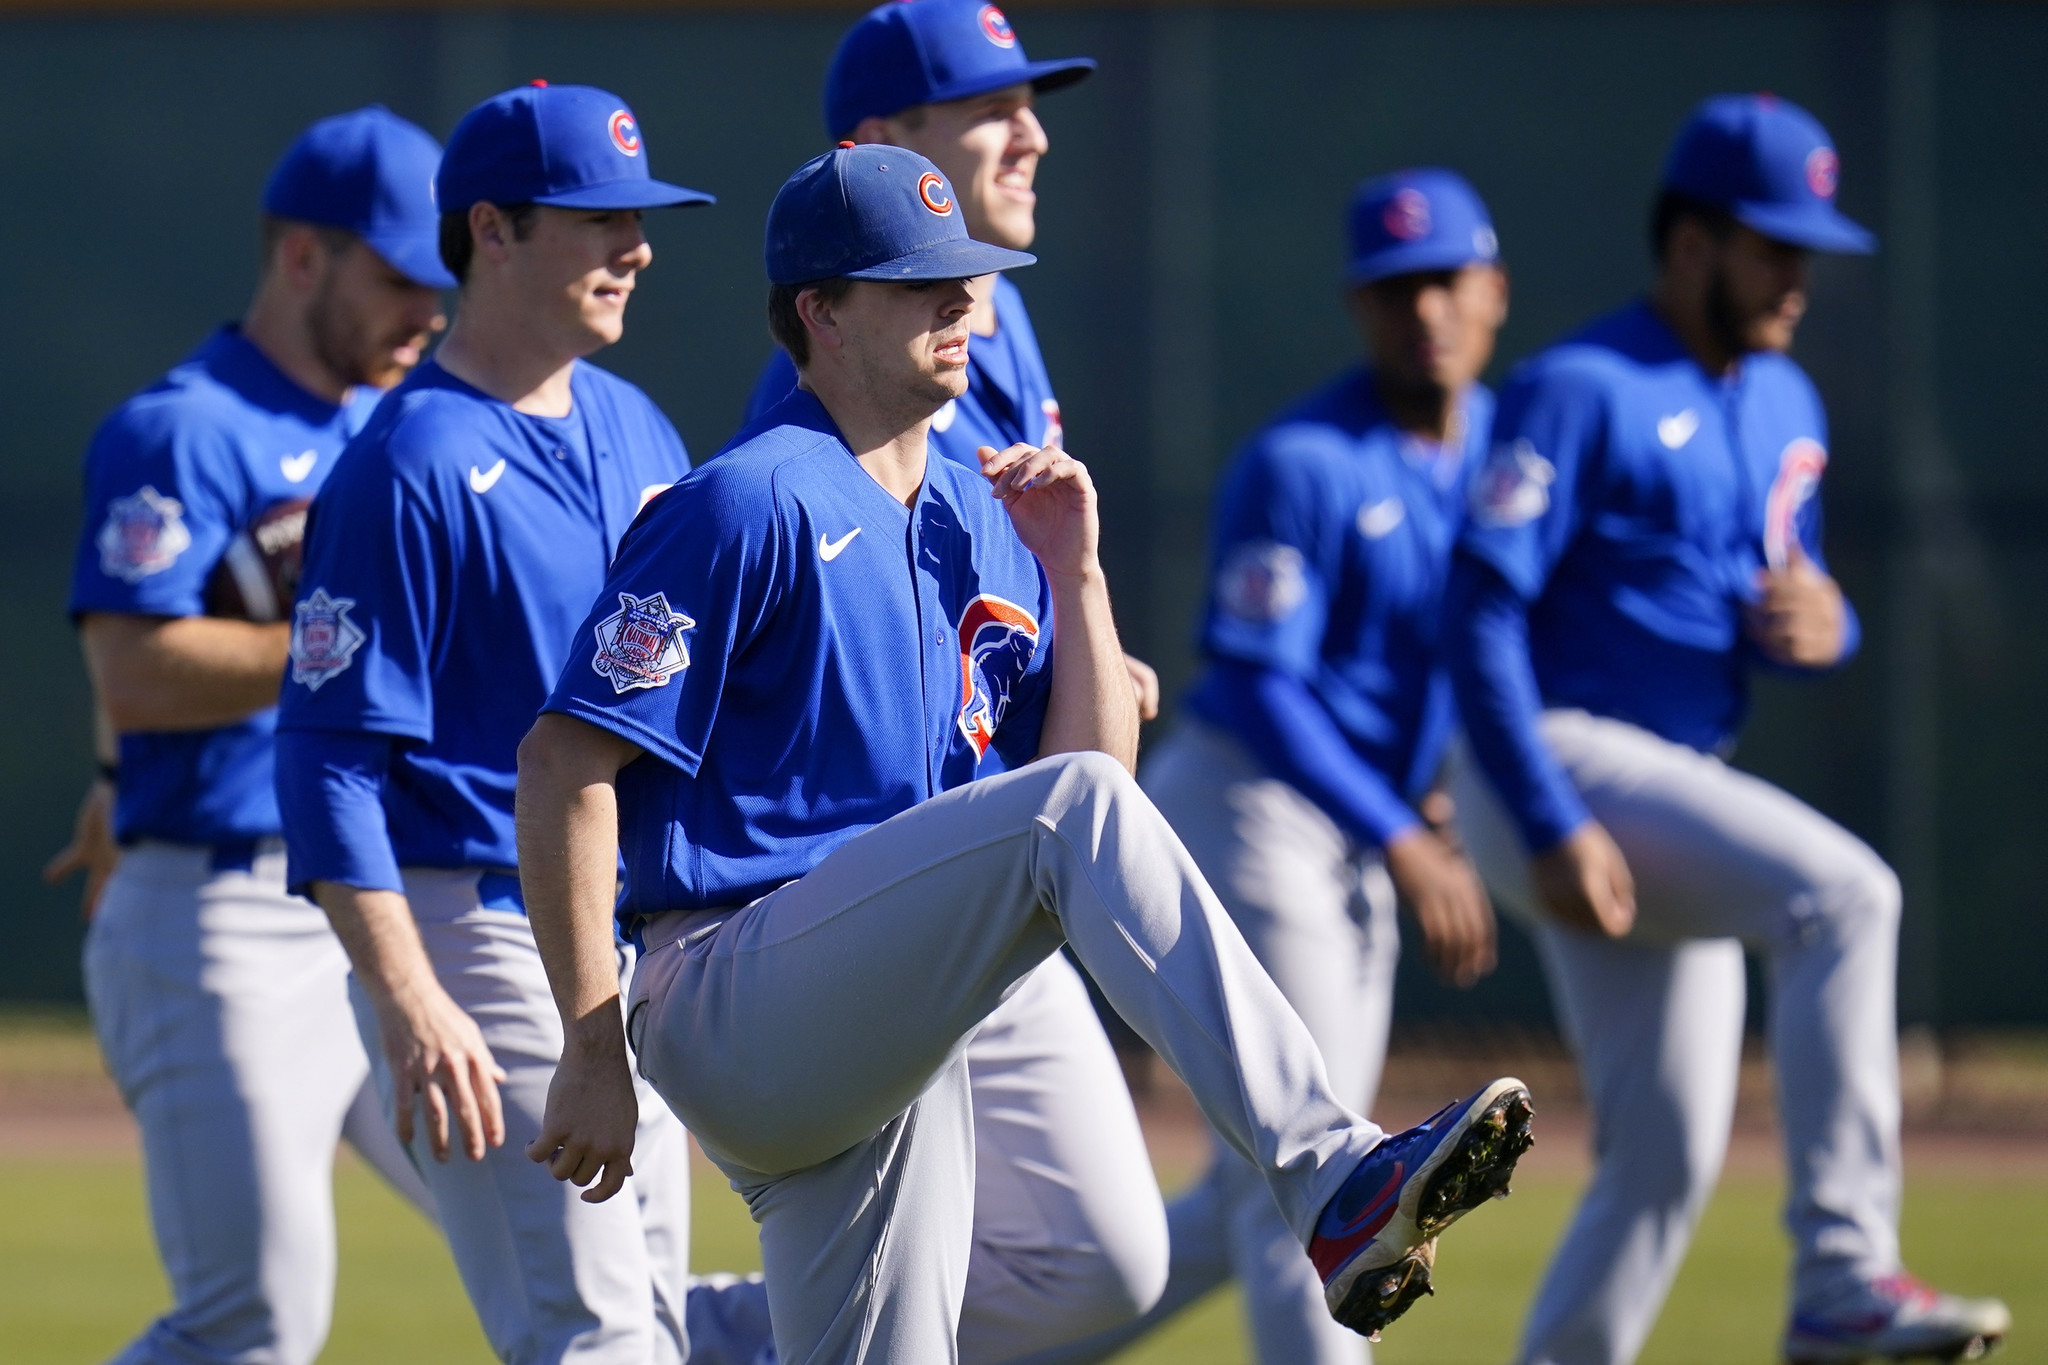 Chicago Cubs Top Prospect Pete Crow-Armstrong Has Crazy Ties to 'Little Big  League' - Fastball